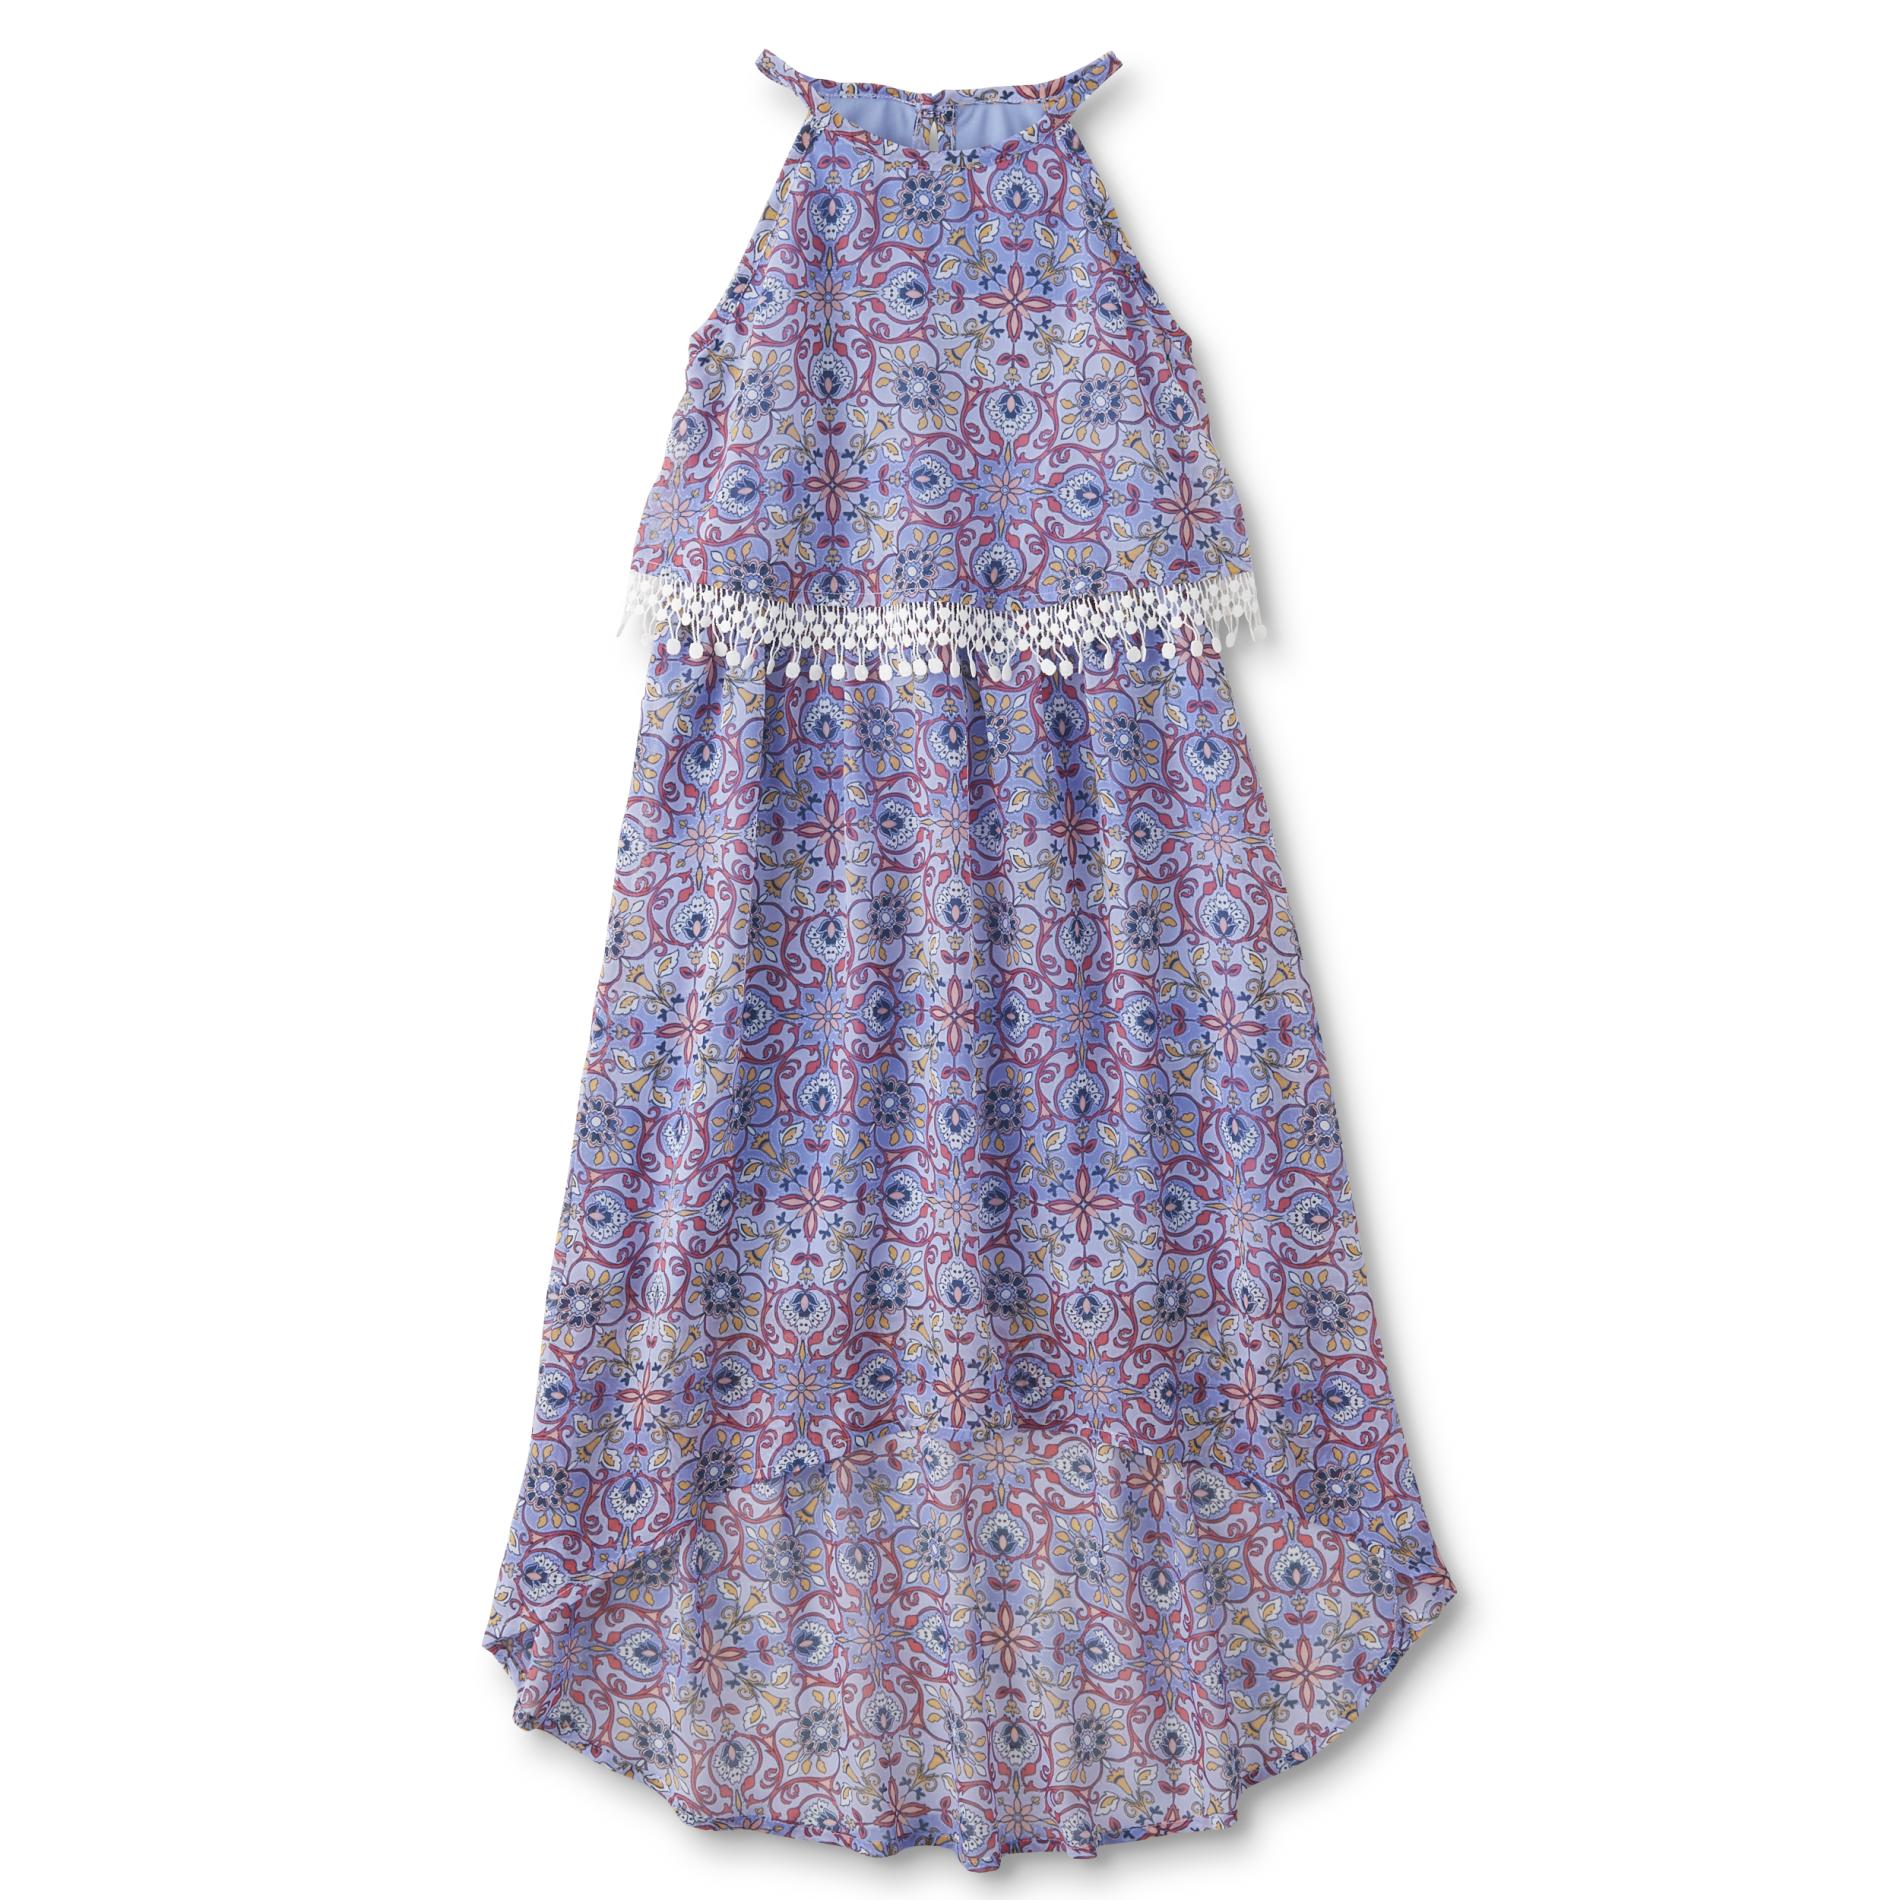 Zoey Girl Girls' Popover High-Low Dress - Floral Arabesque